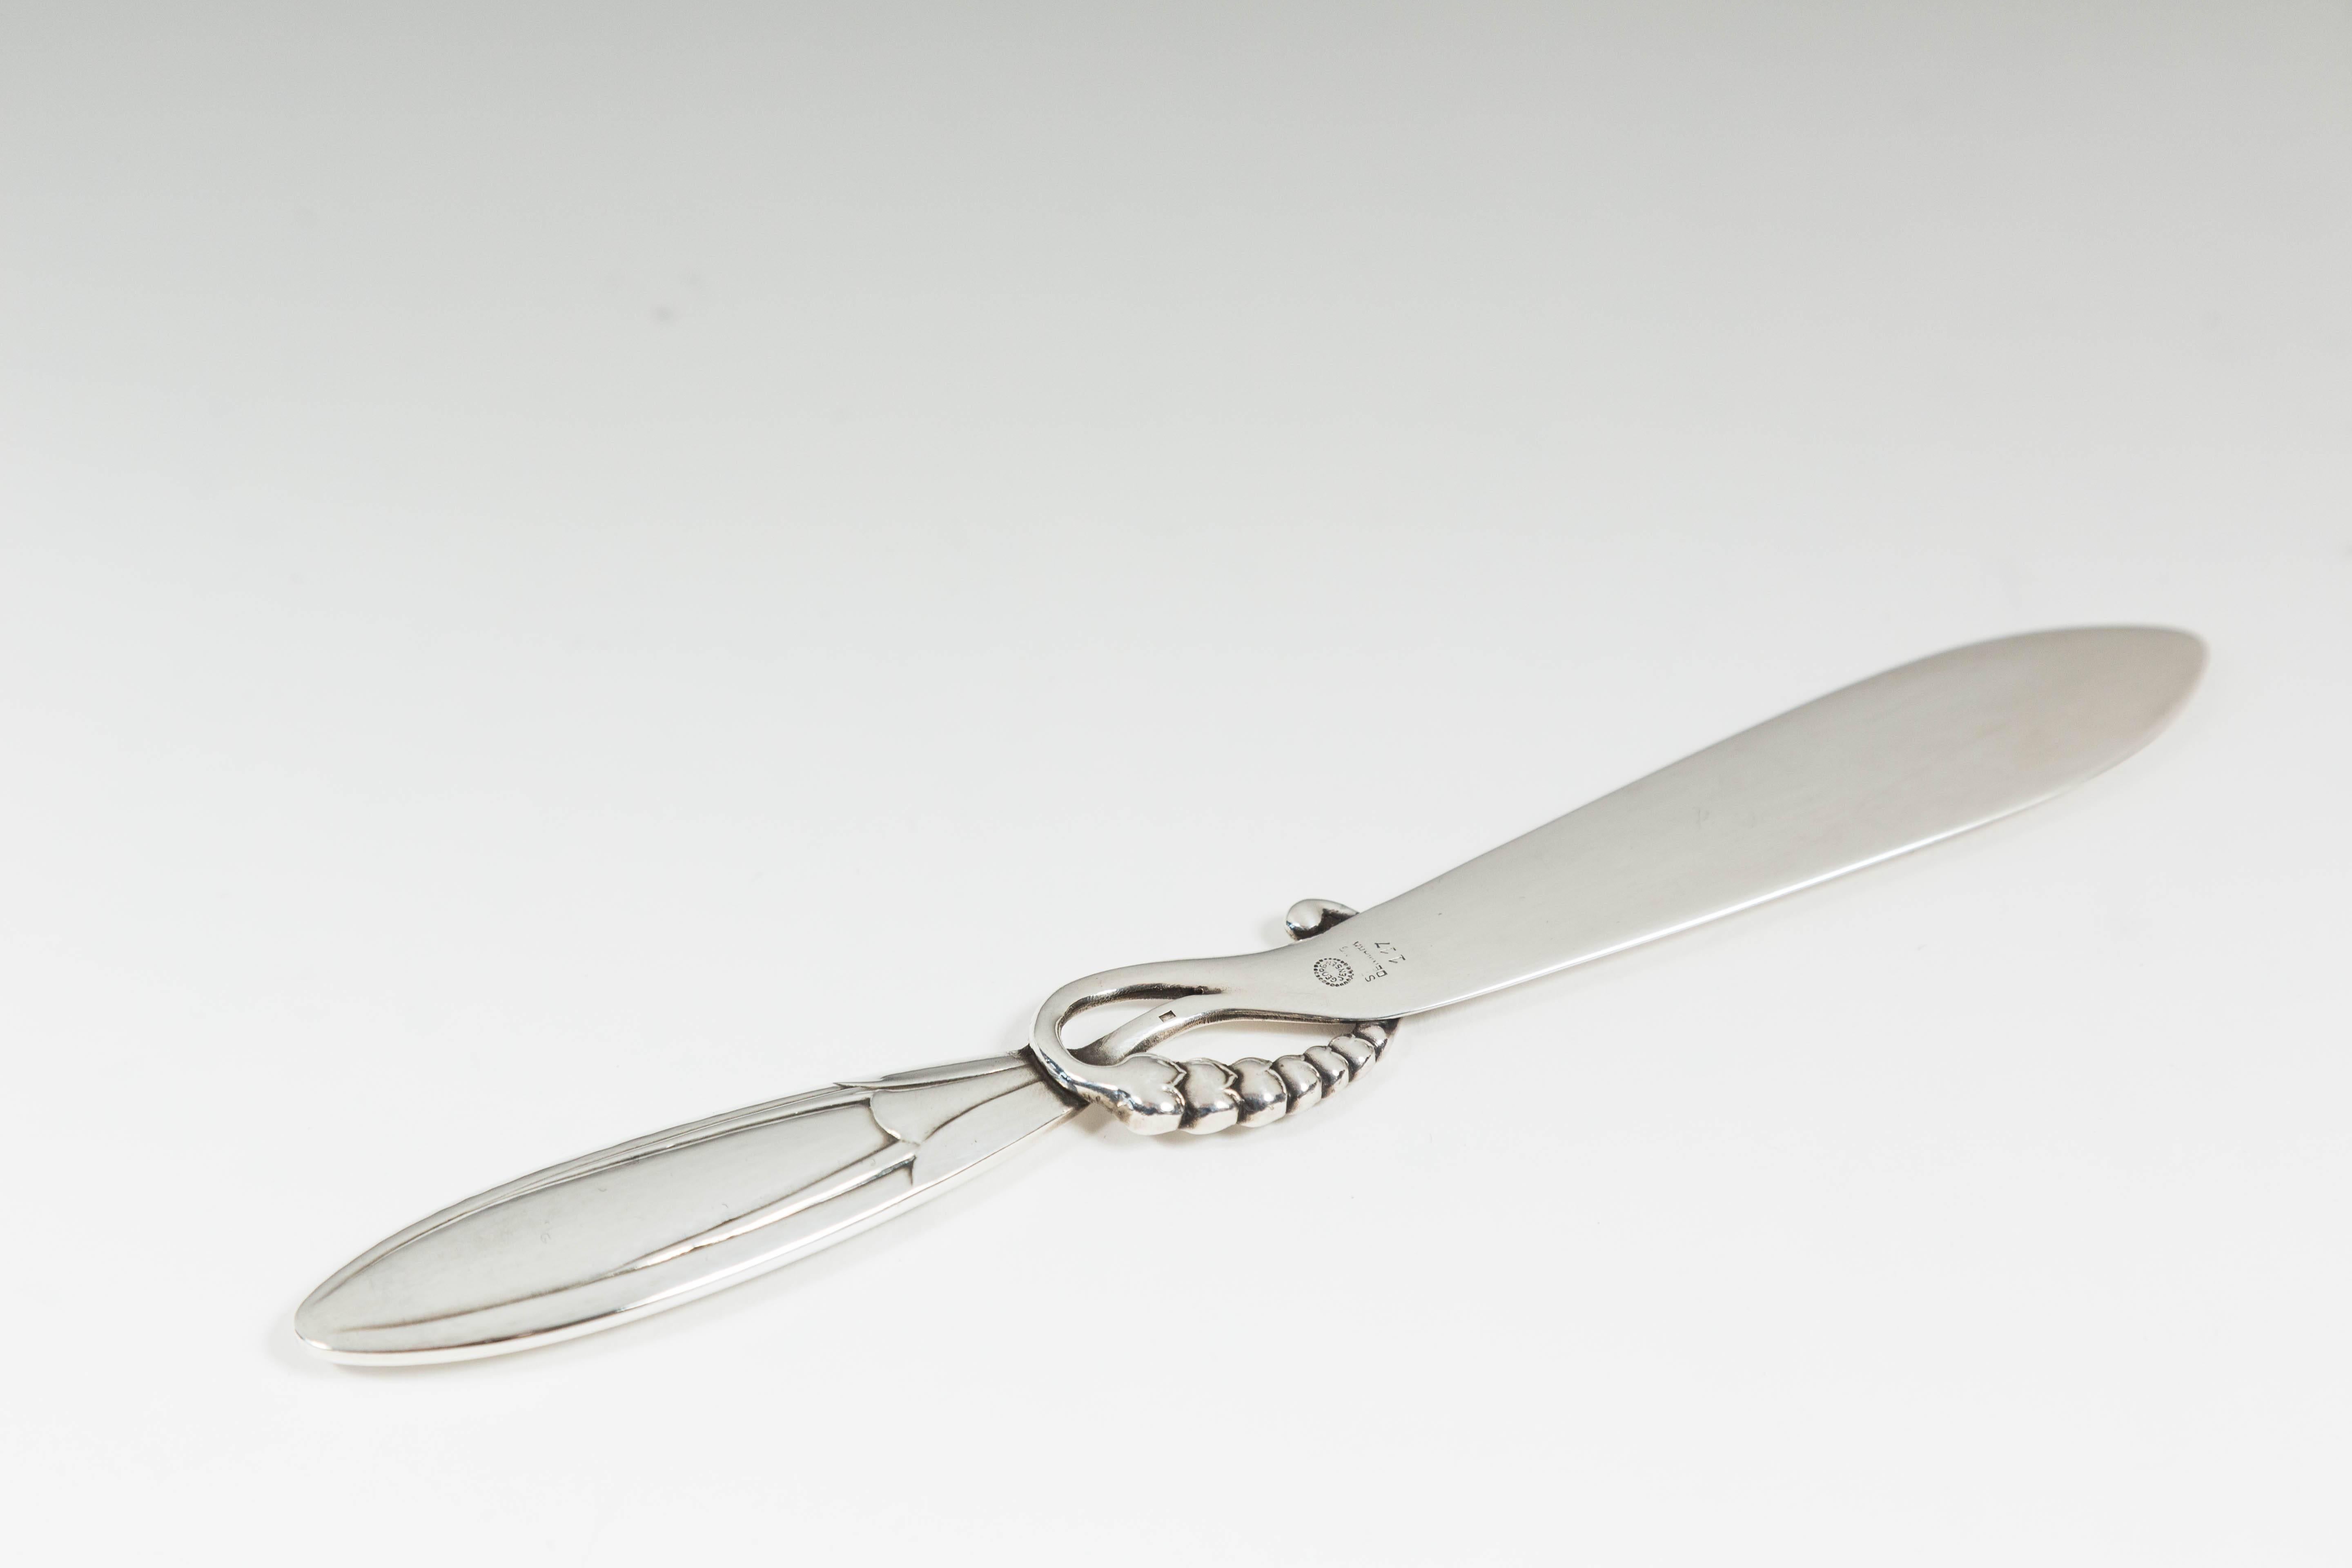 Enchanting letter opener by Danish manufacturer Georg Jensen. Sterling silver. With floral ornamentation about the handle. Bears Georg Jensen, Sterling Denmark silver marks on the blade. Model 117. Measures: 6 1/2 inches long. Jensen Hallmark dates